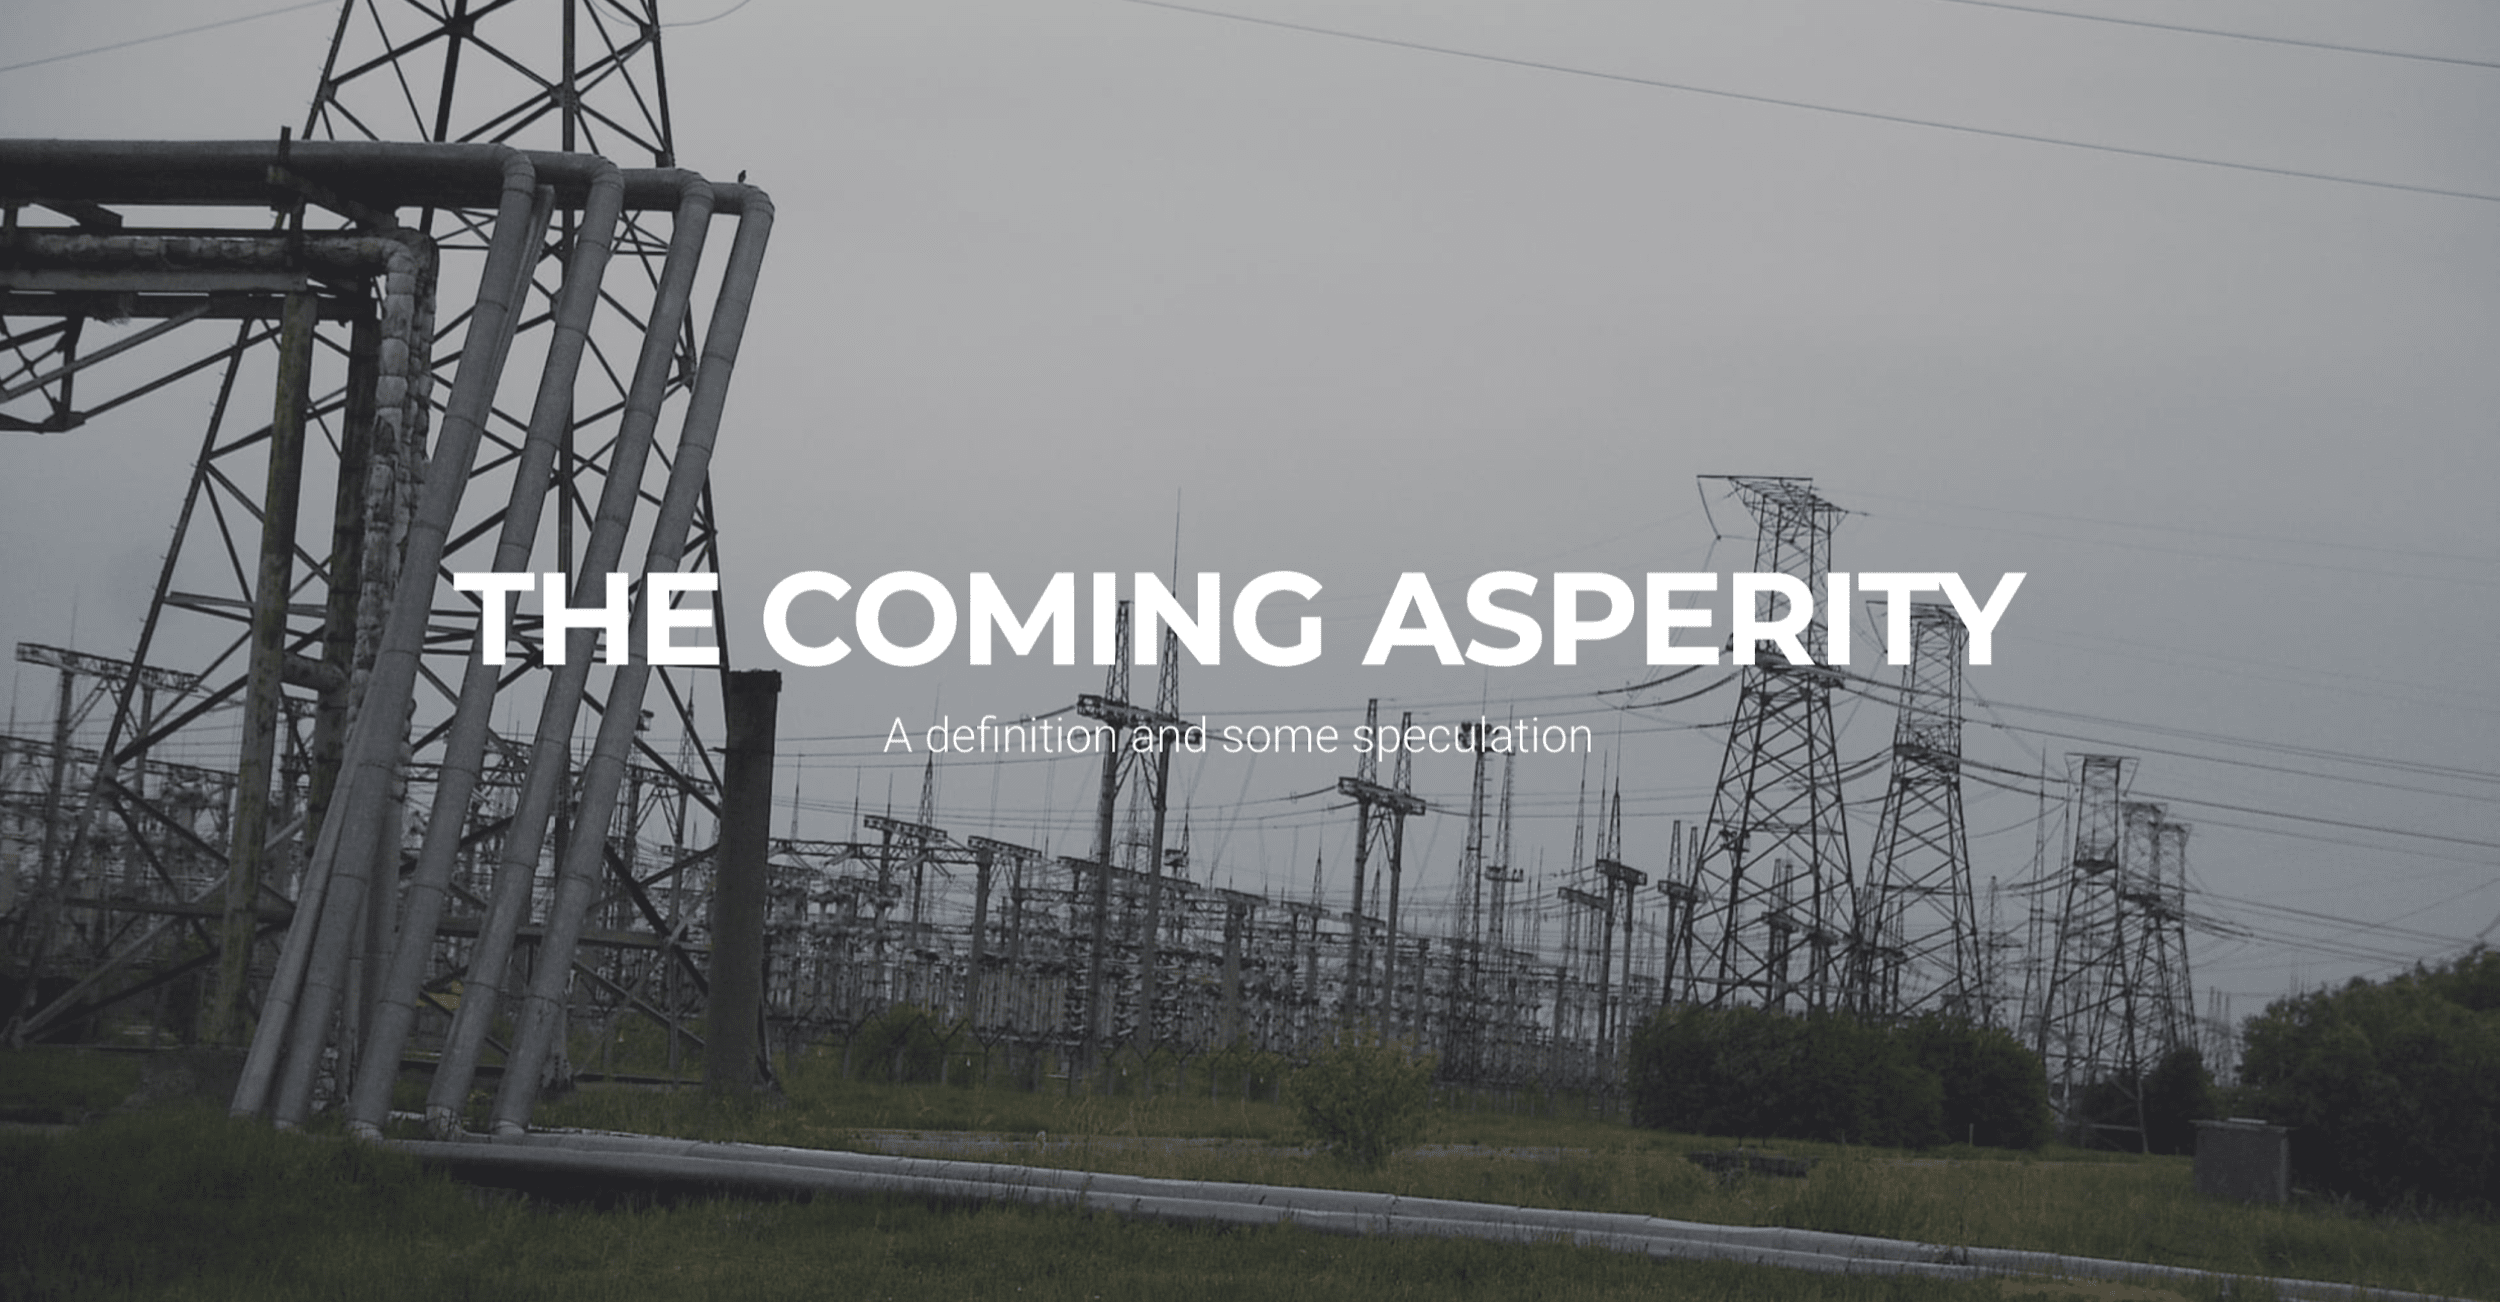 The Coming Asperity